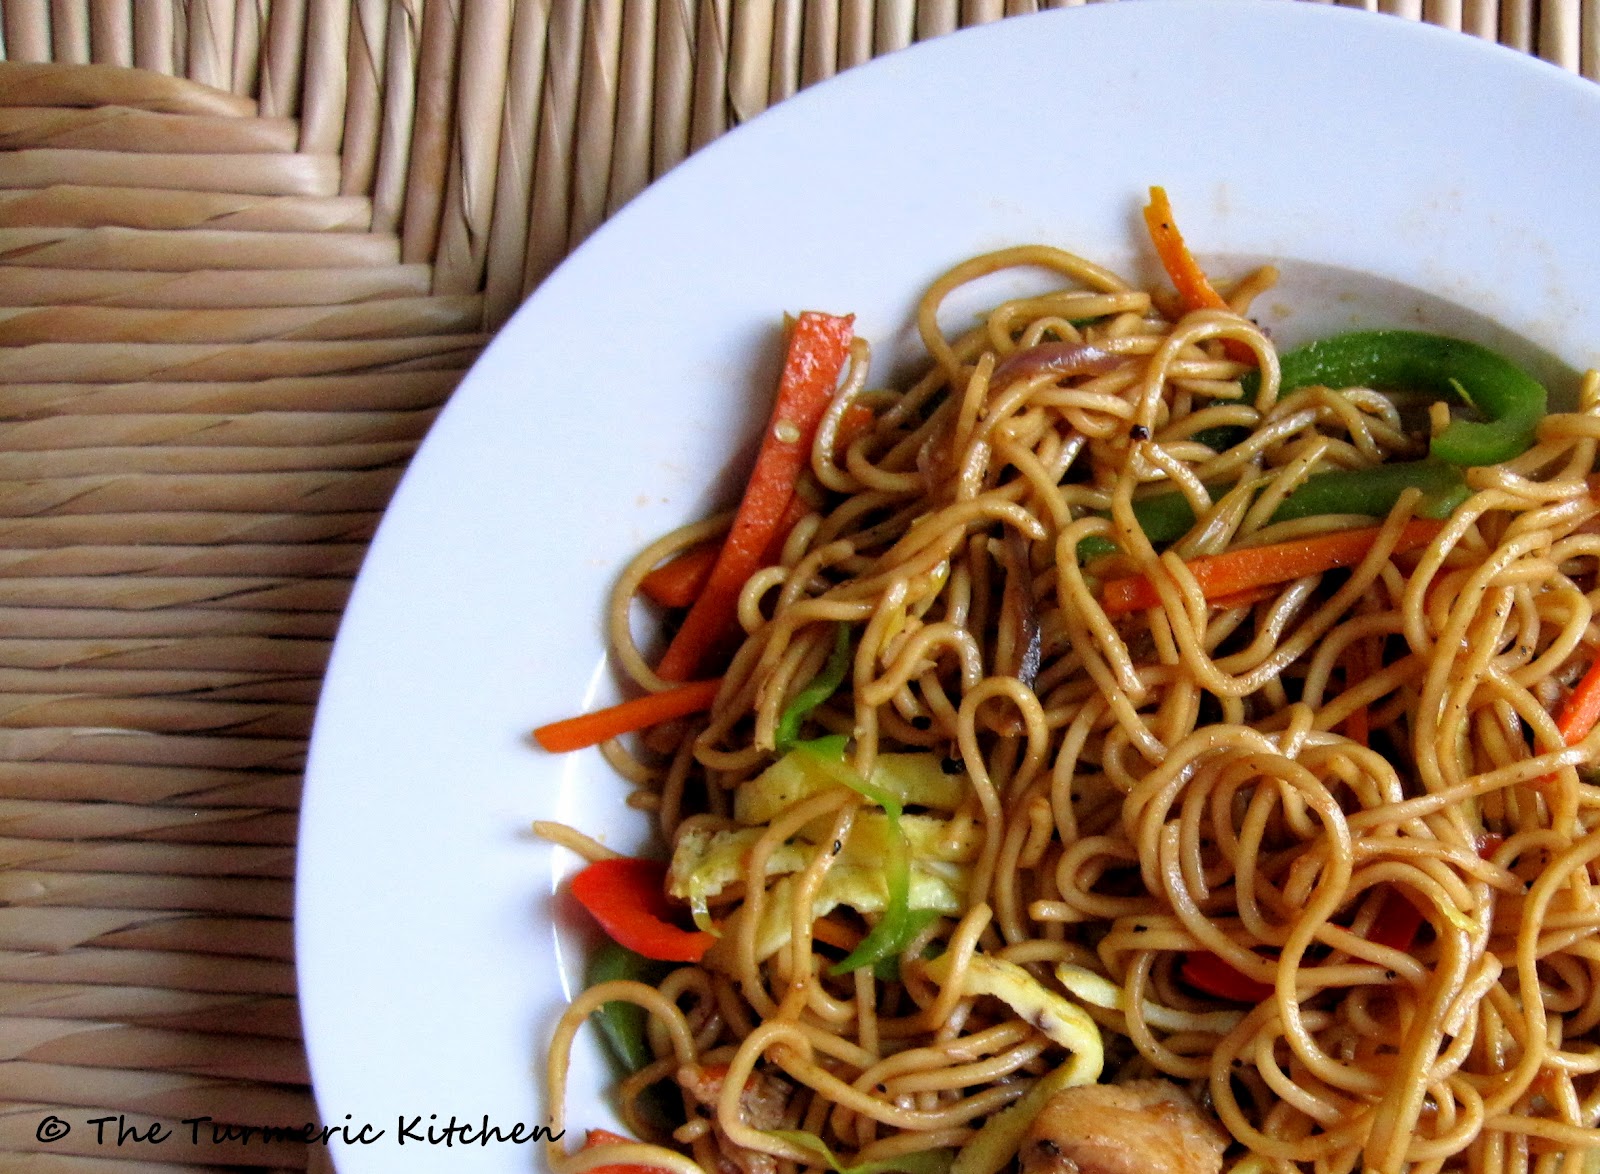 The Turmeric Kitchen: Chinese cuisine with Indian flare -Chilli Garlic